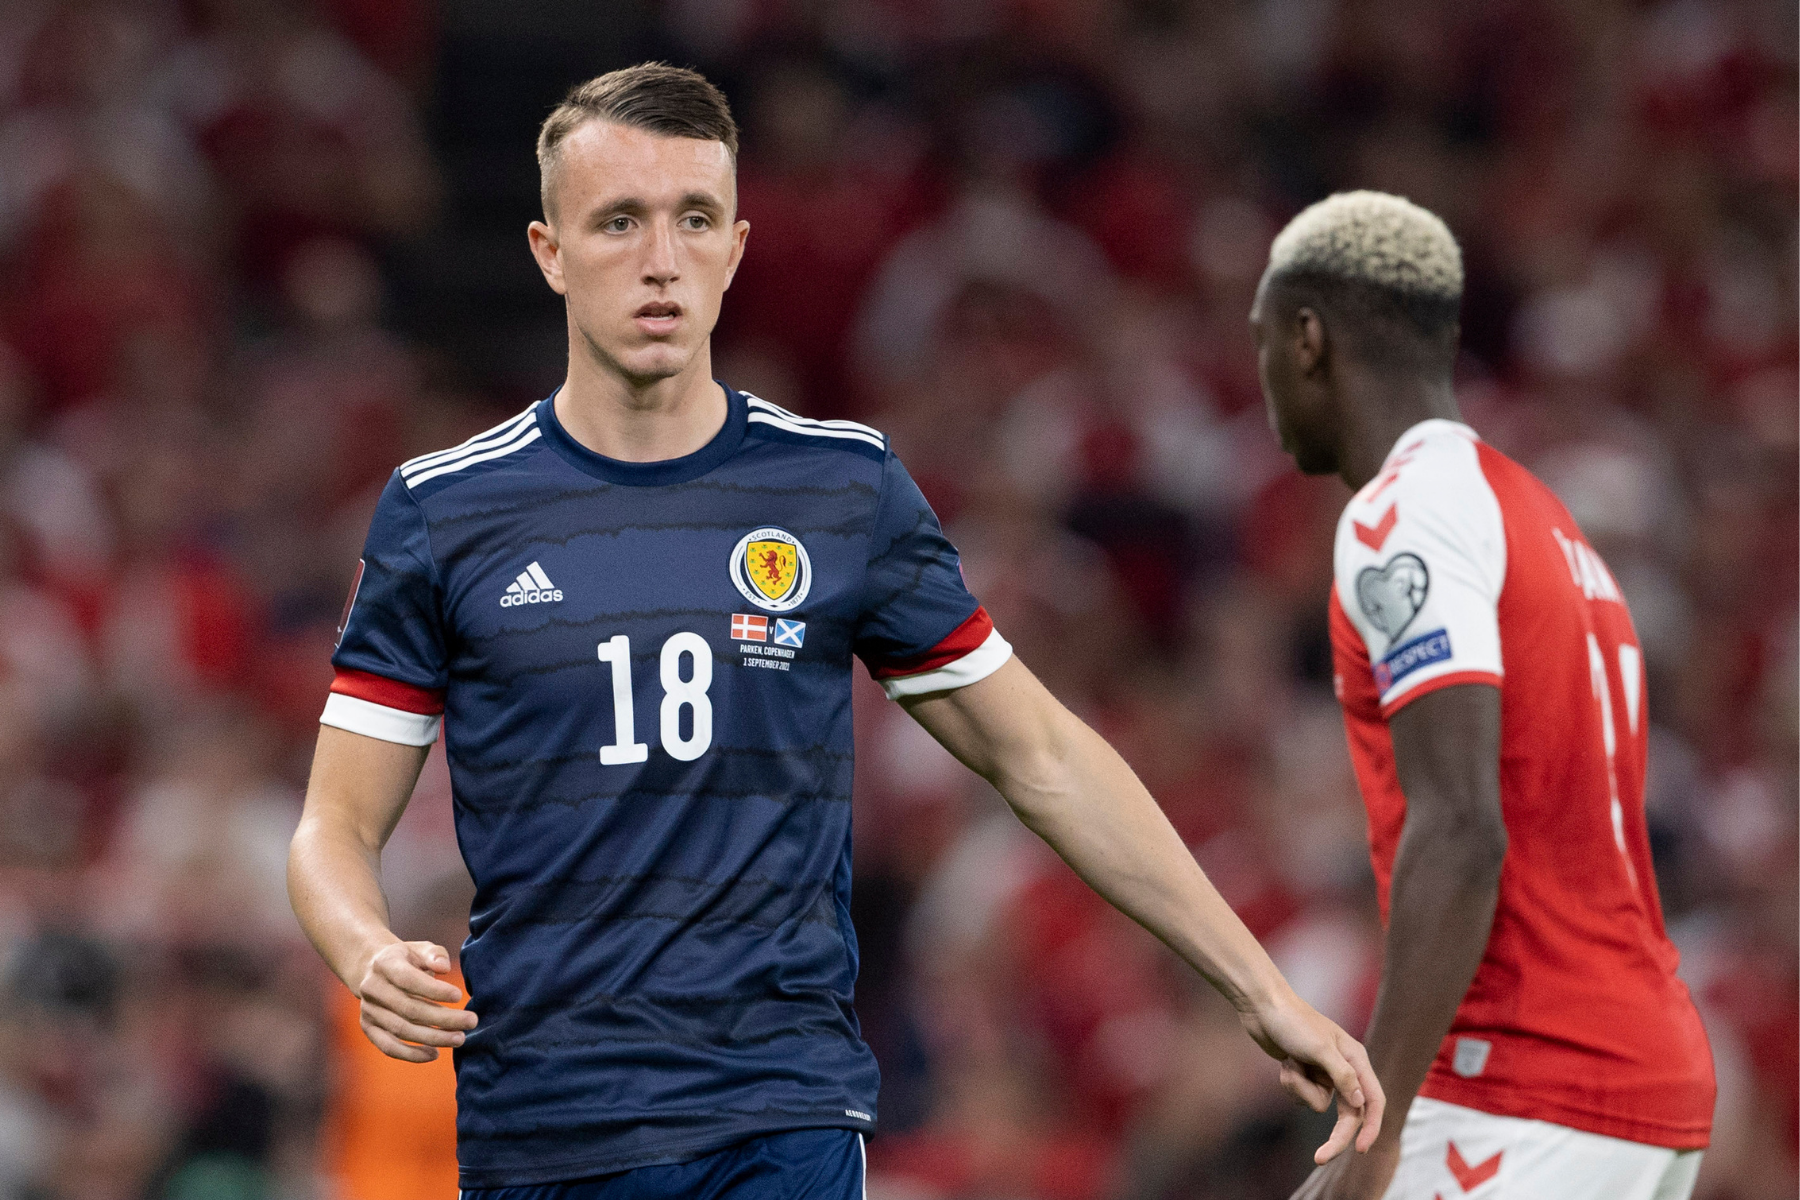 Celtic playmaker David Turnbull ready to fill in for absentees and help Scotland reach Qatar 2022 play-offs